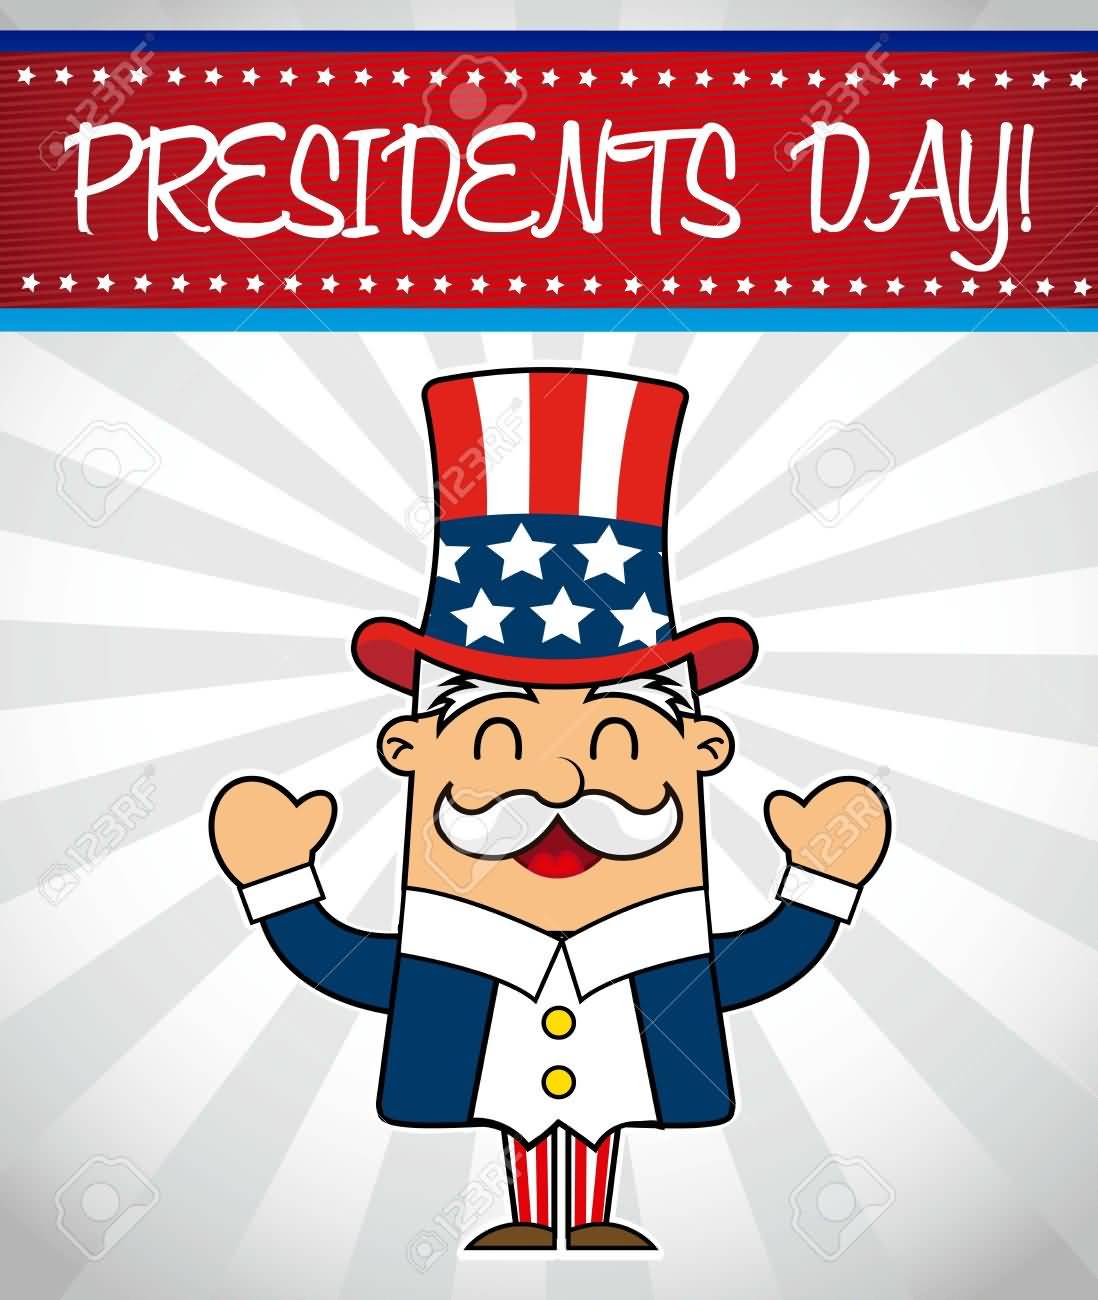 Uncle Sam Wishing You Happy Presidents Day